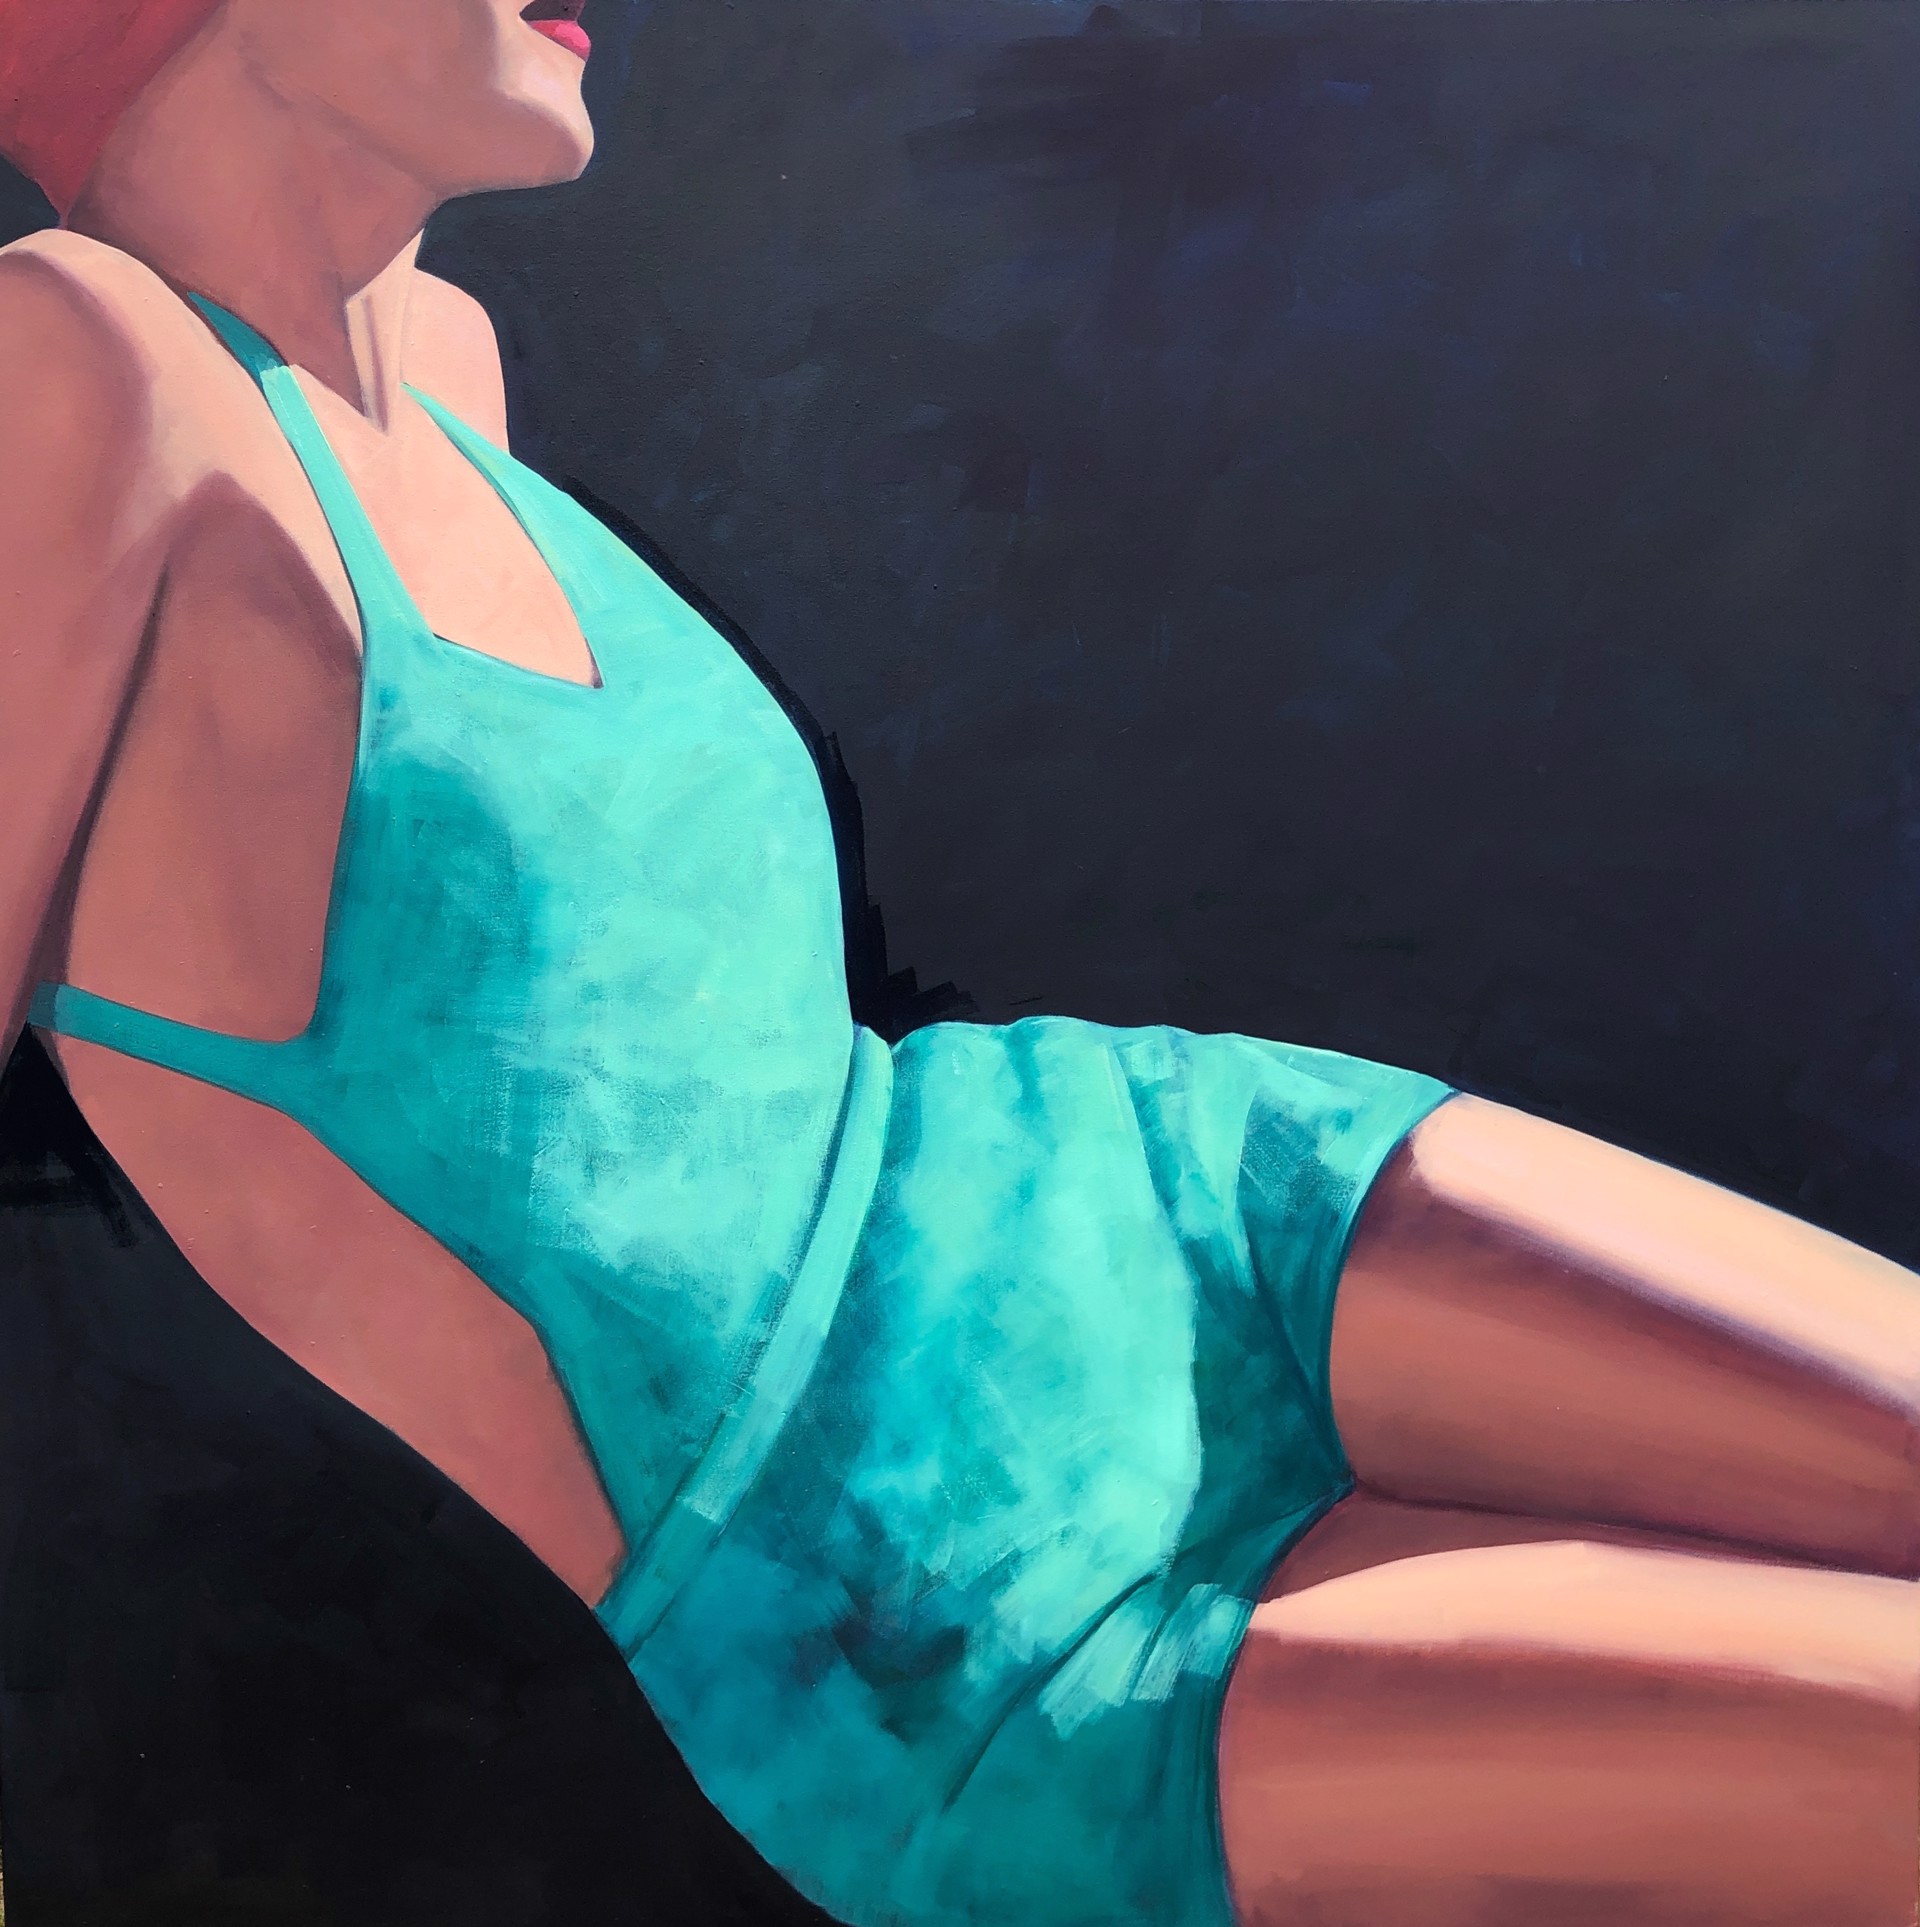 Swim Time by Tracey Sylvester Harris